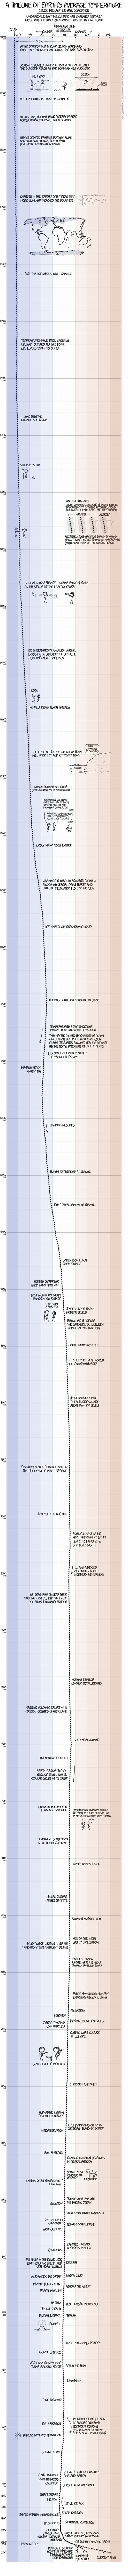 http://imgs.xkcd.com/comics/earth_temperature_timeline_2x.png